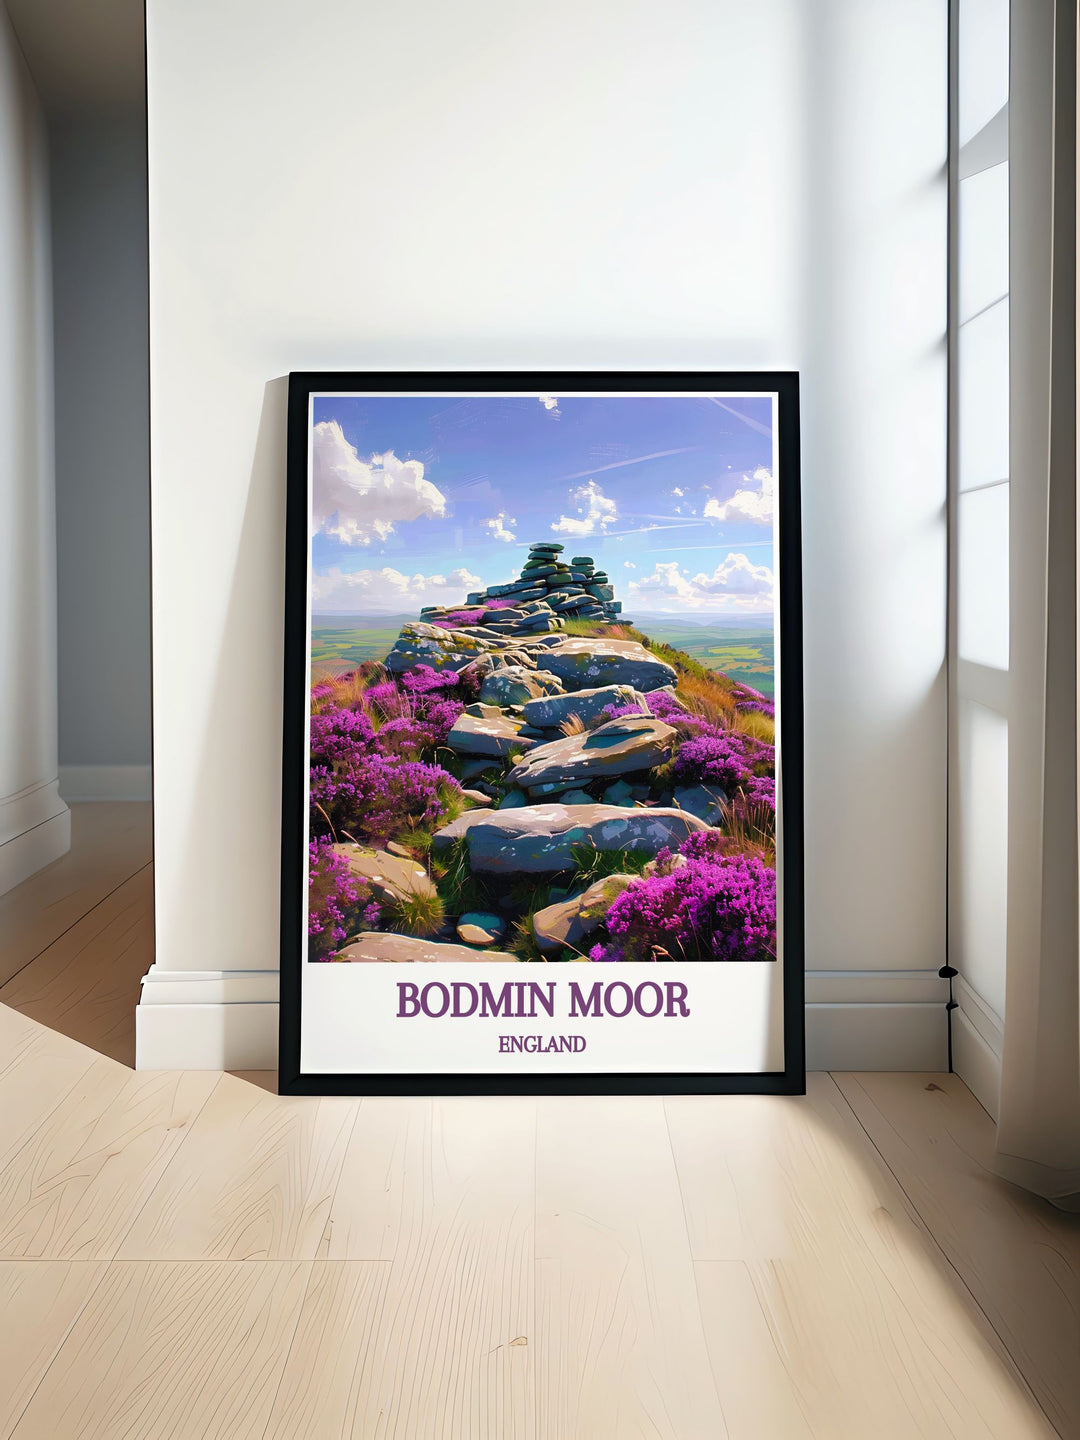 Wall art featuring the breathtaking view from Roughtor summit on Bodmin Moor, capturing the rugged rocks and sweeping vistas of this iconic Cornish landmark, perfect for adding a touch of natural beauty and history to your home decor.